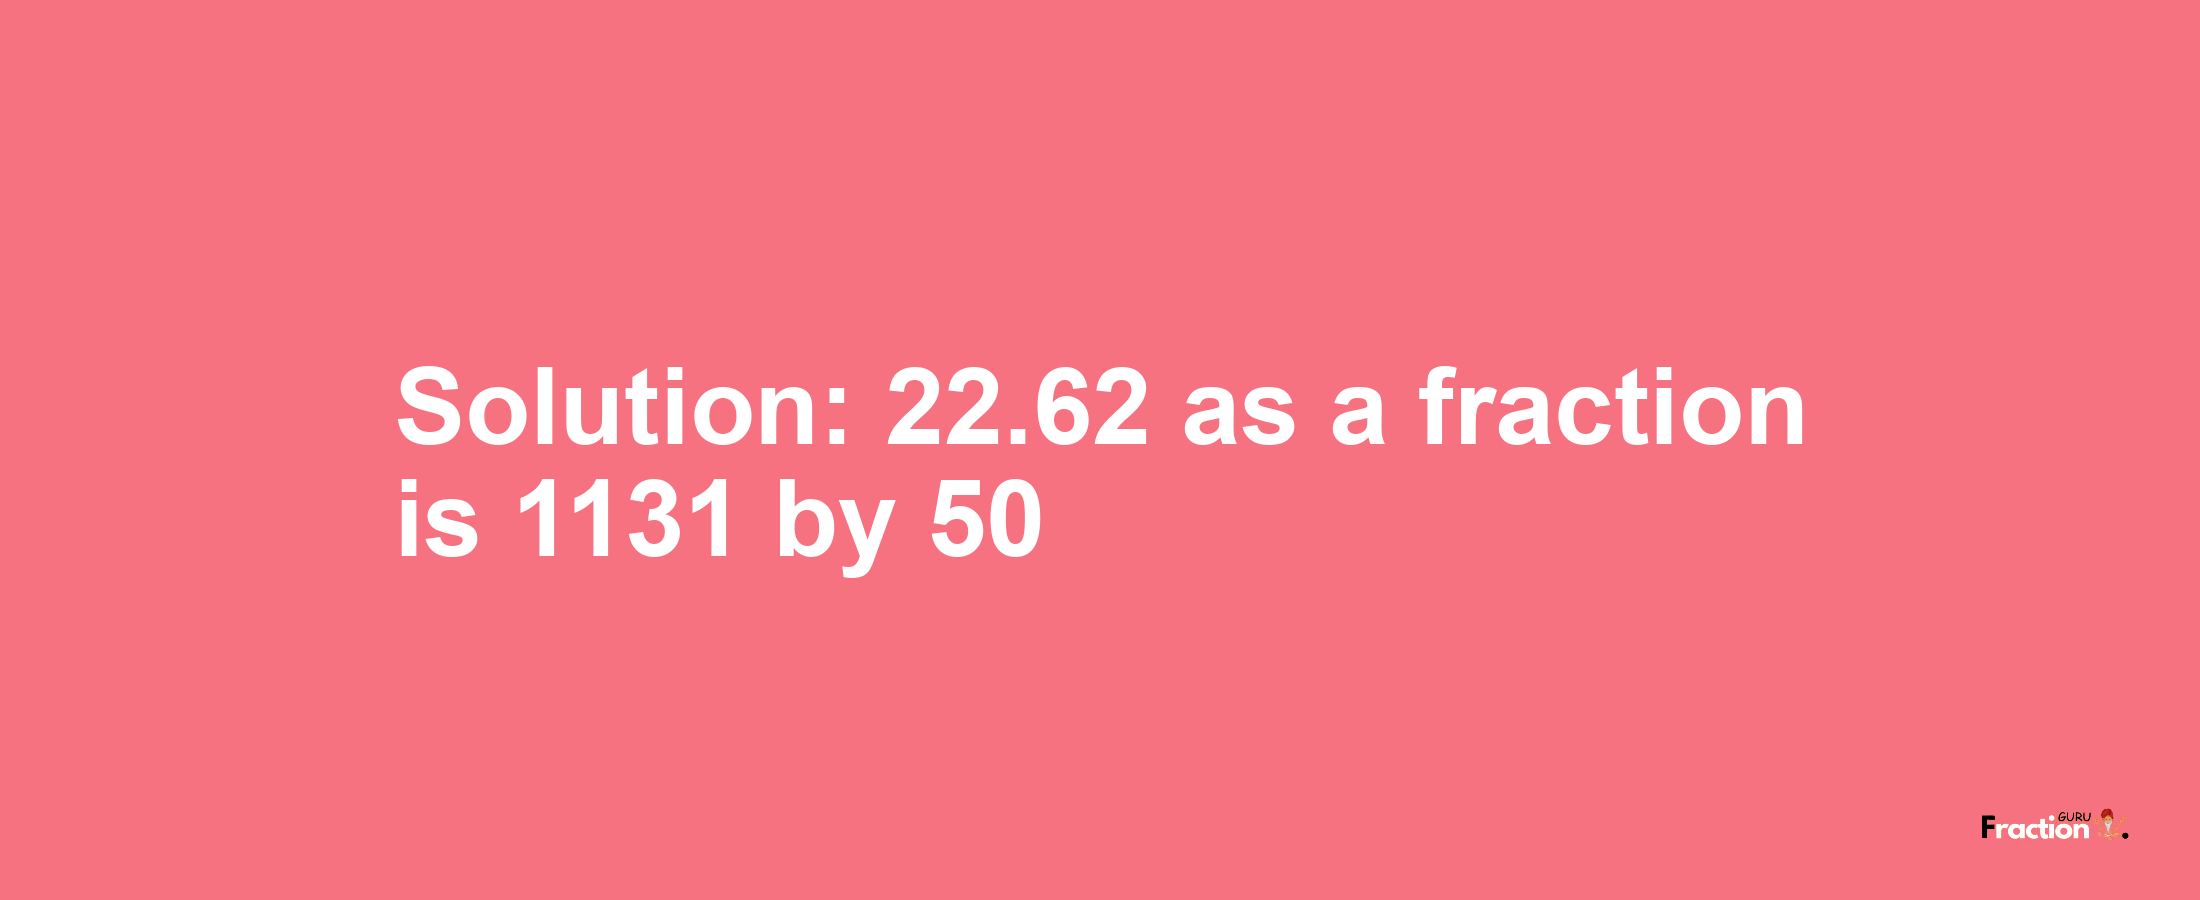 Solution:22.62 as a fraction is 1131/50